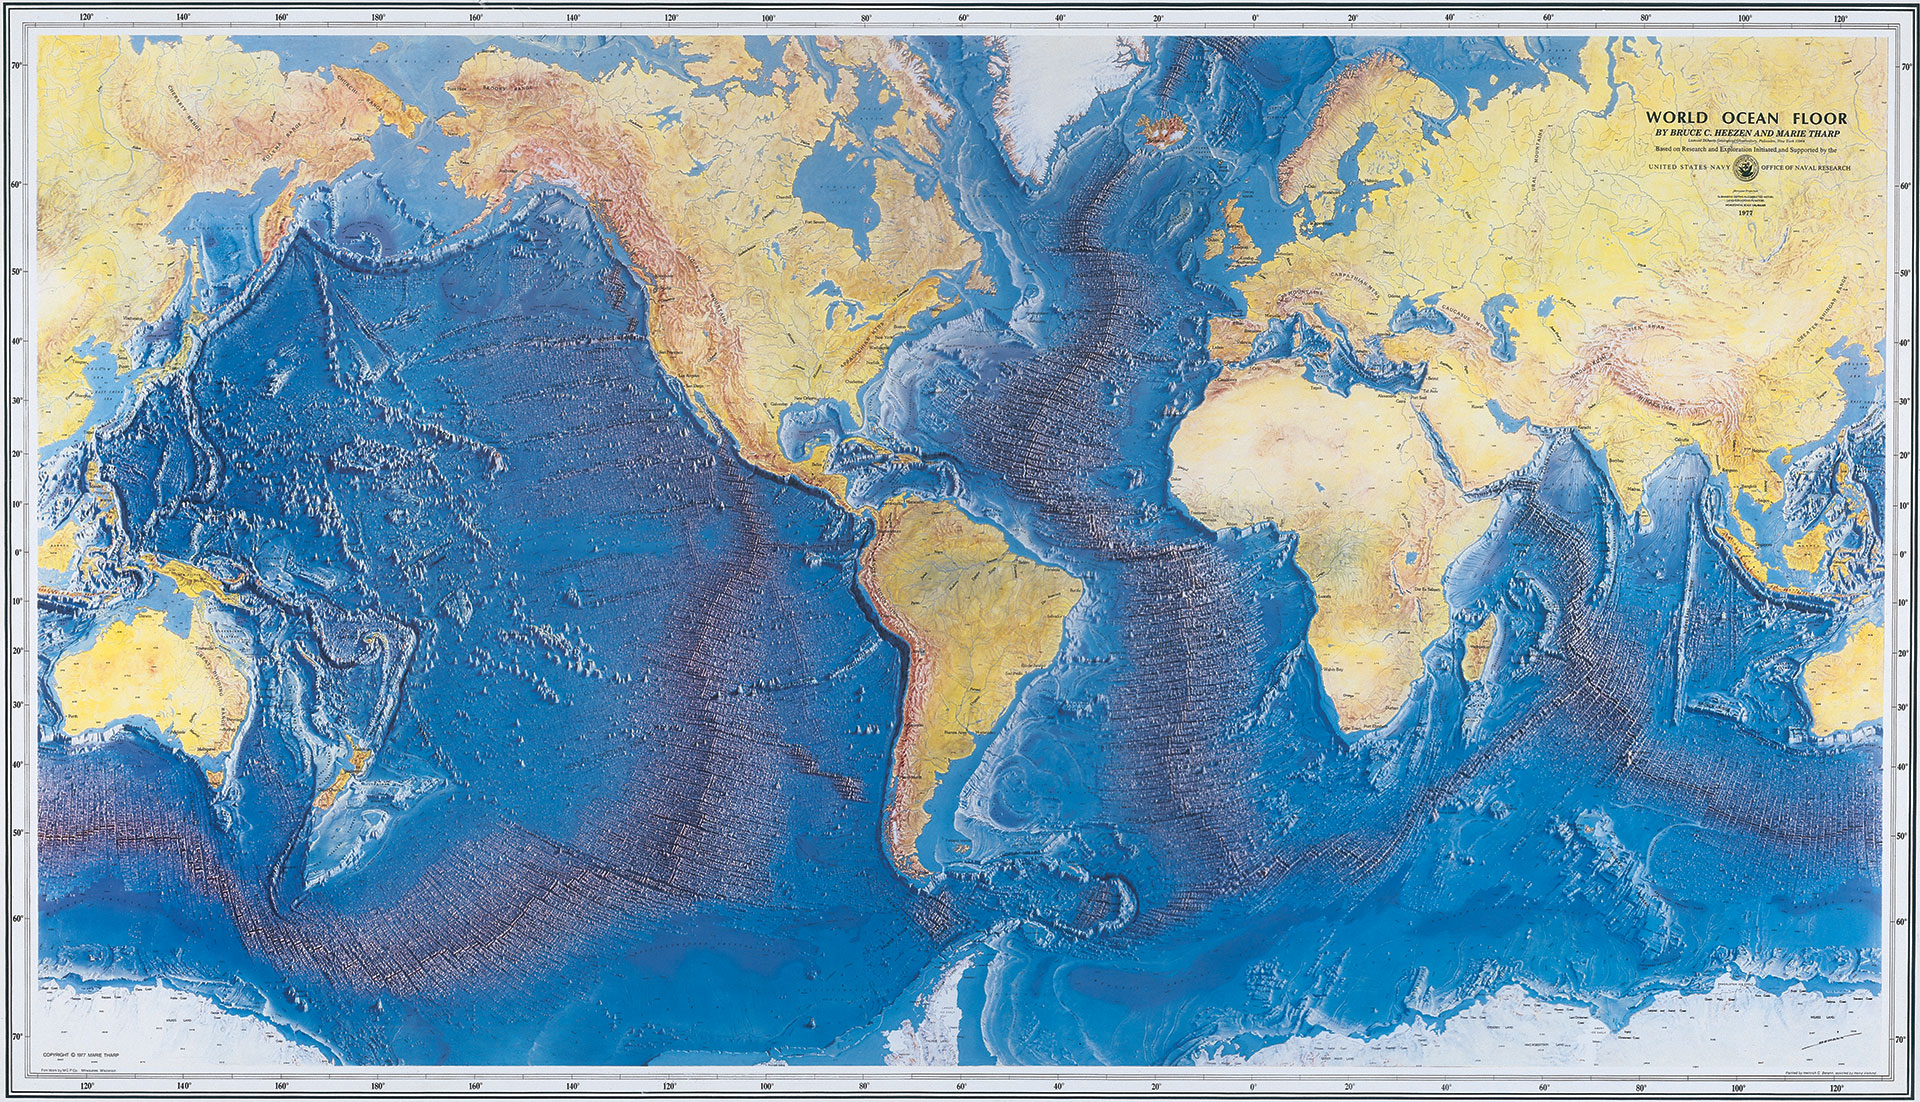 Tharp’s work represented the first systematic attempt to map the entire ocean floor. The World Ocean Floor map was published in 1977 by the Office of Naval Research and is still in wide use today.